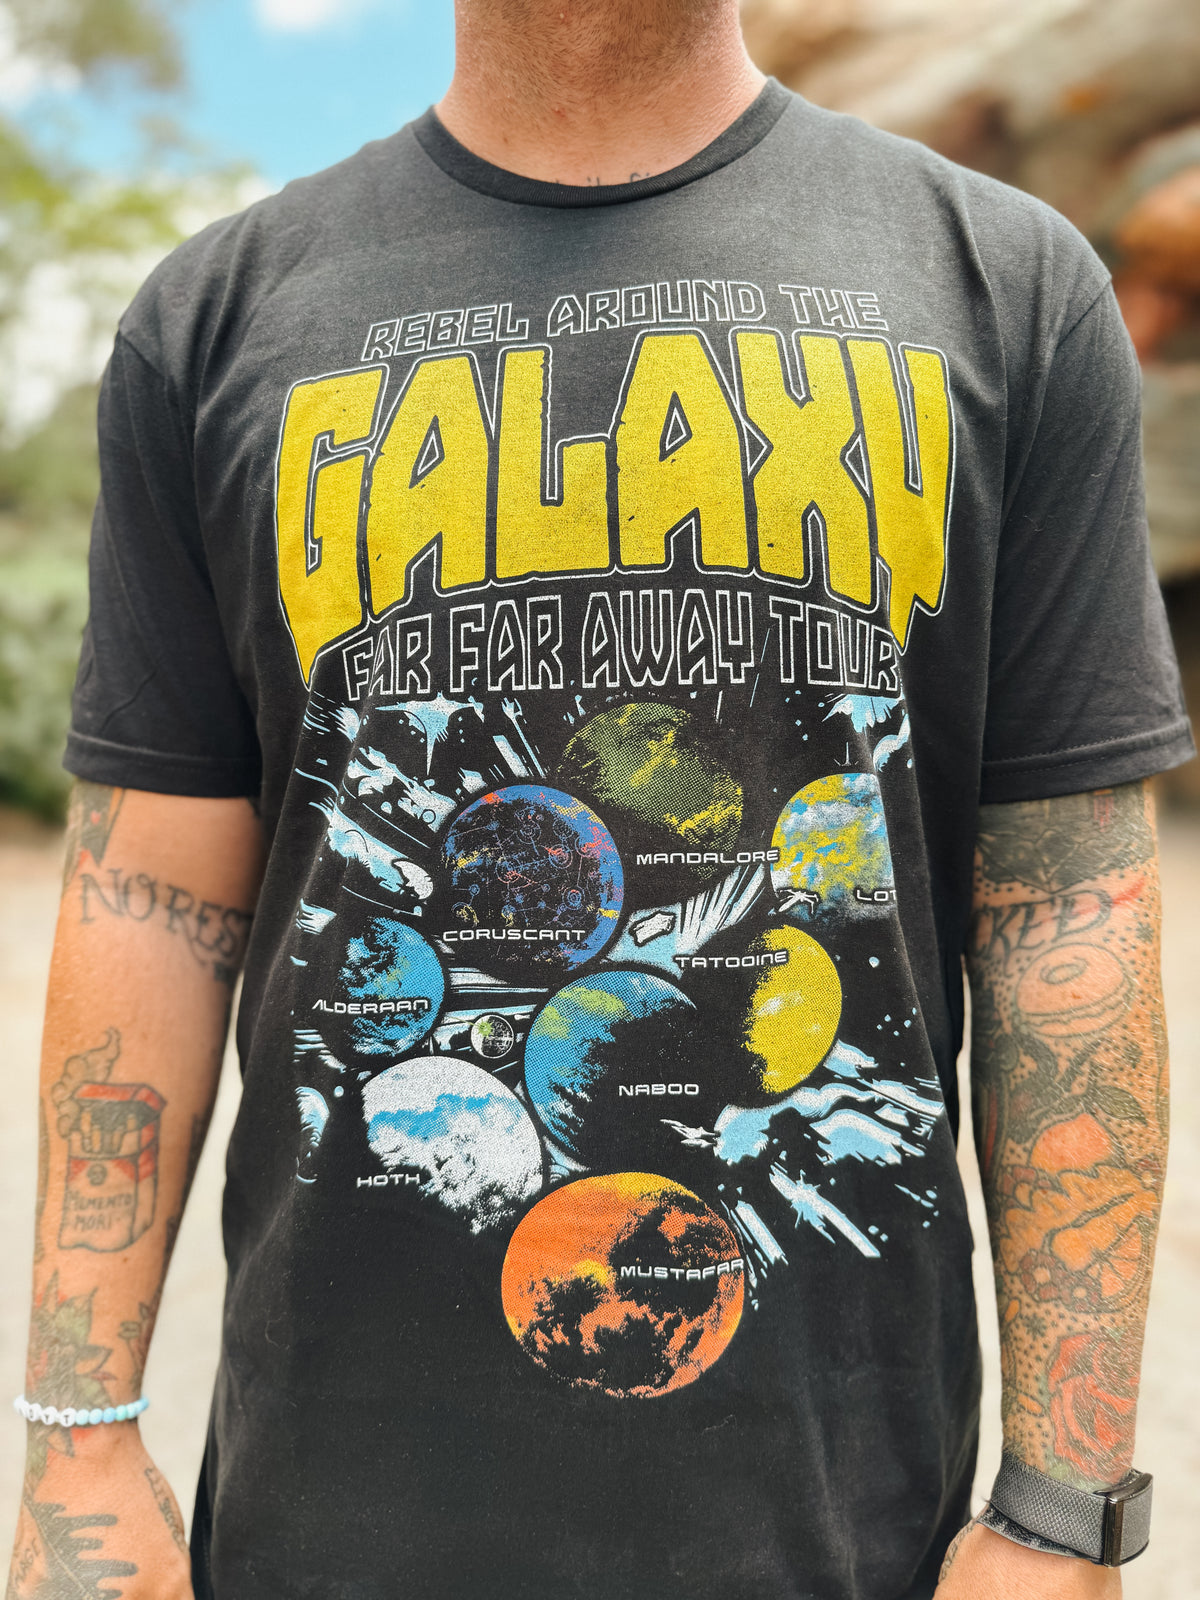 the lost bros Rebel Around The Galaxy Tee